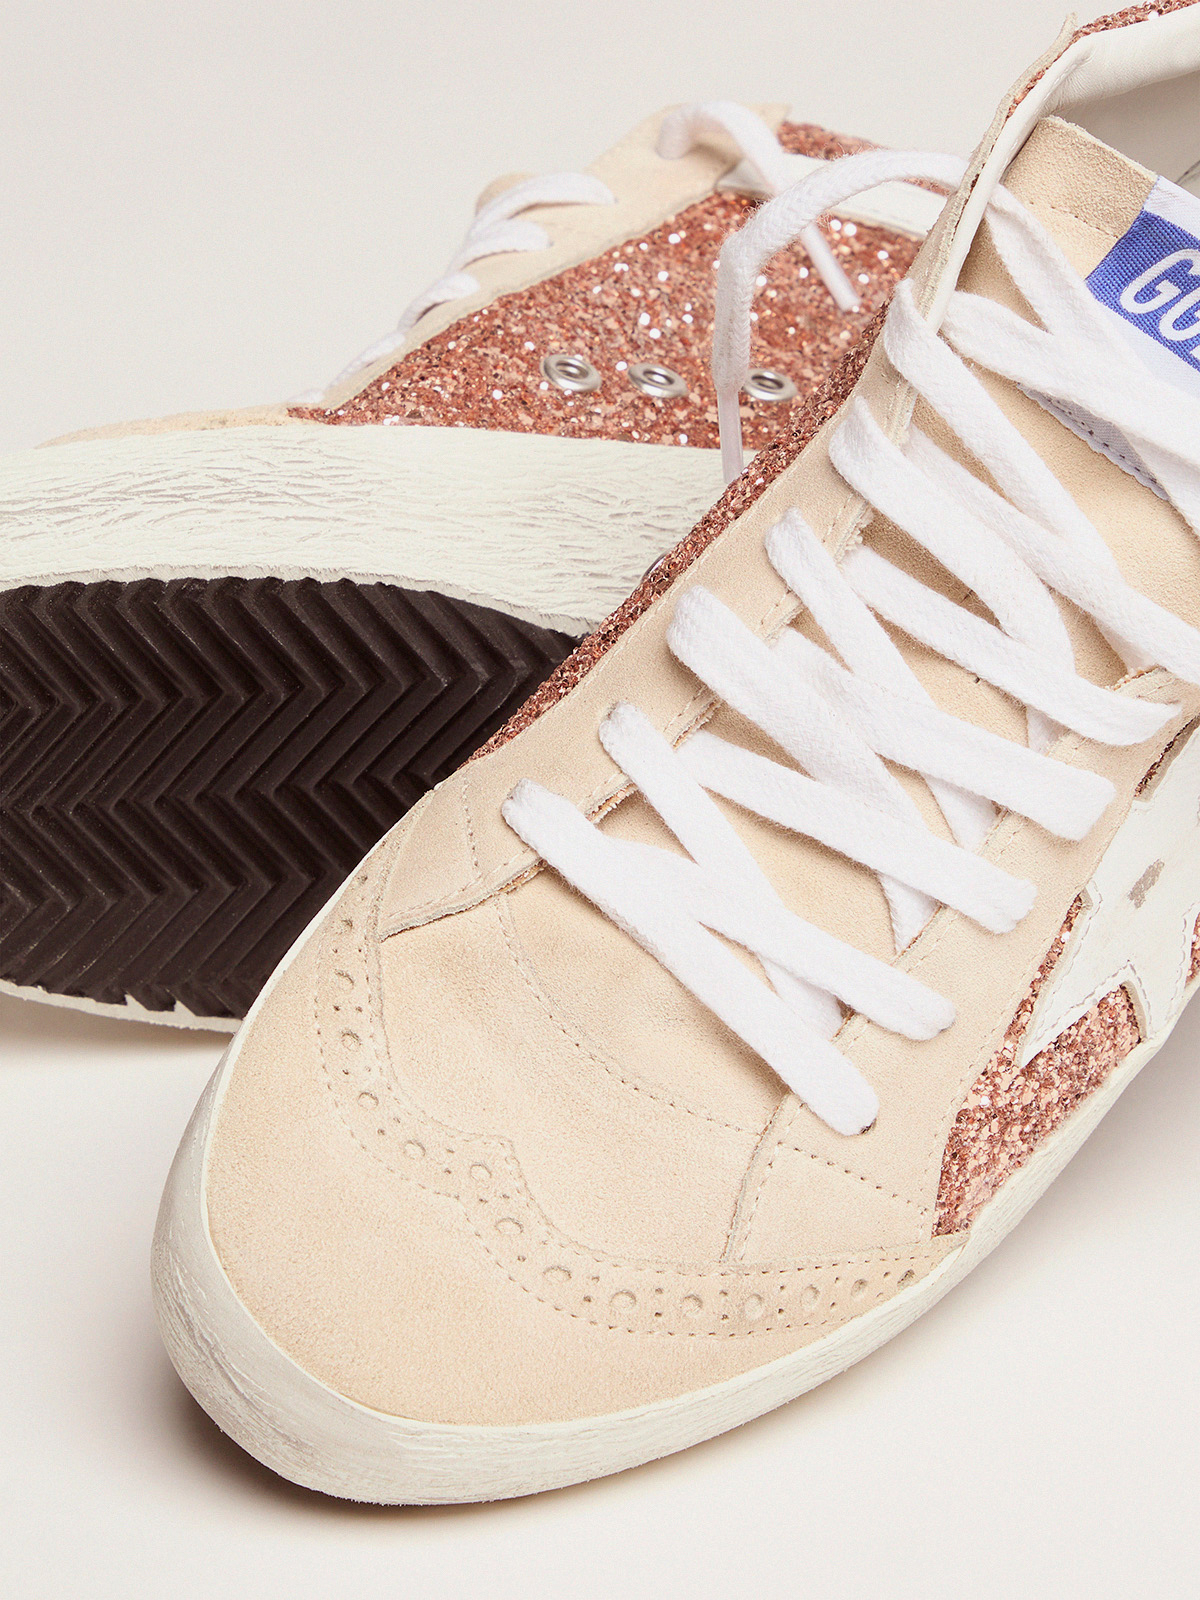 Mid Star sneakers with pink-gold glitter | Golden Goose